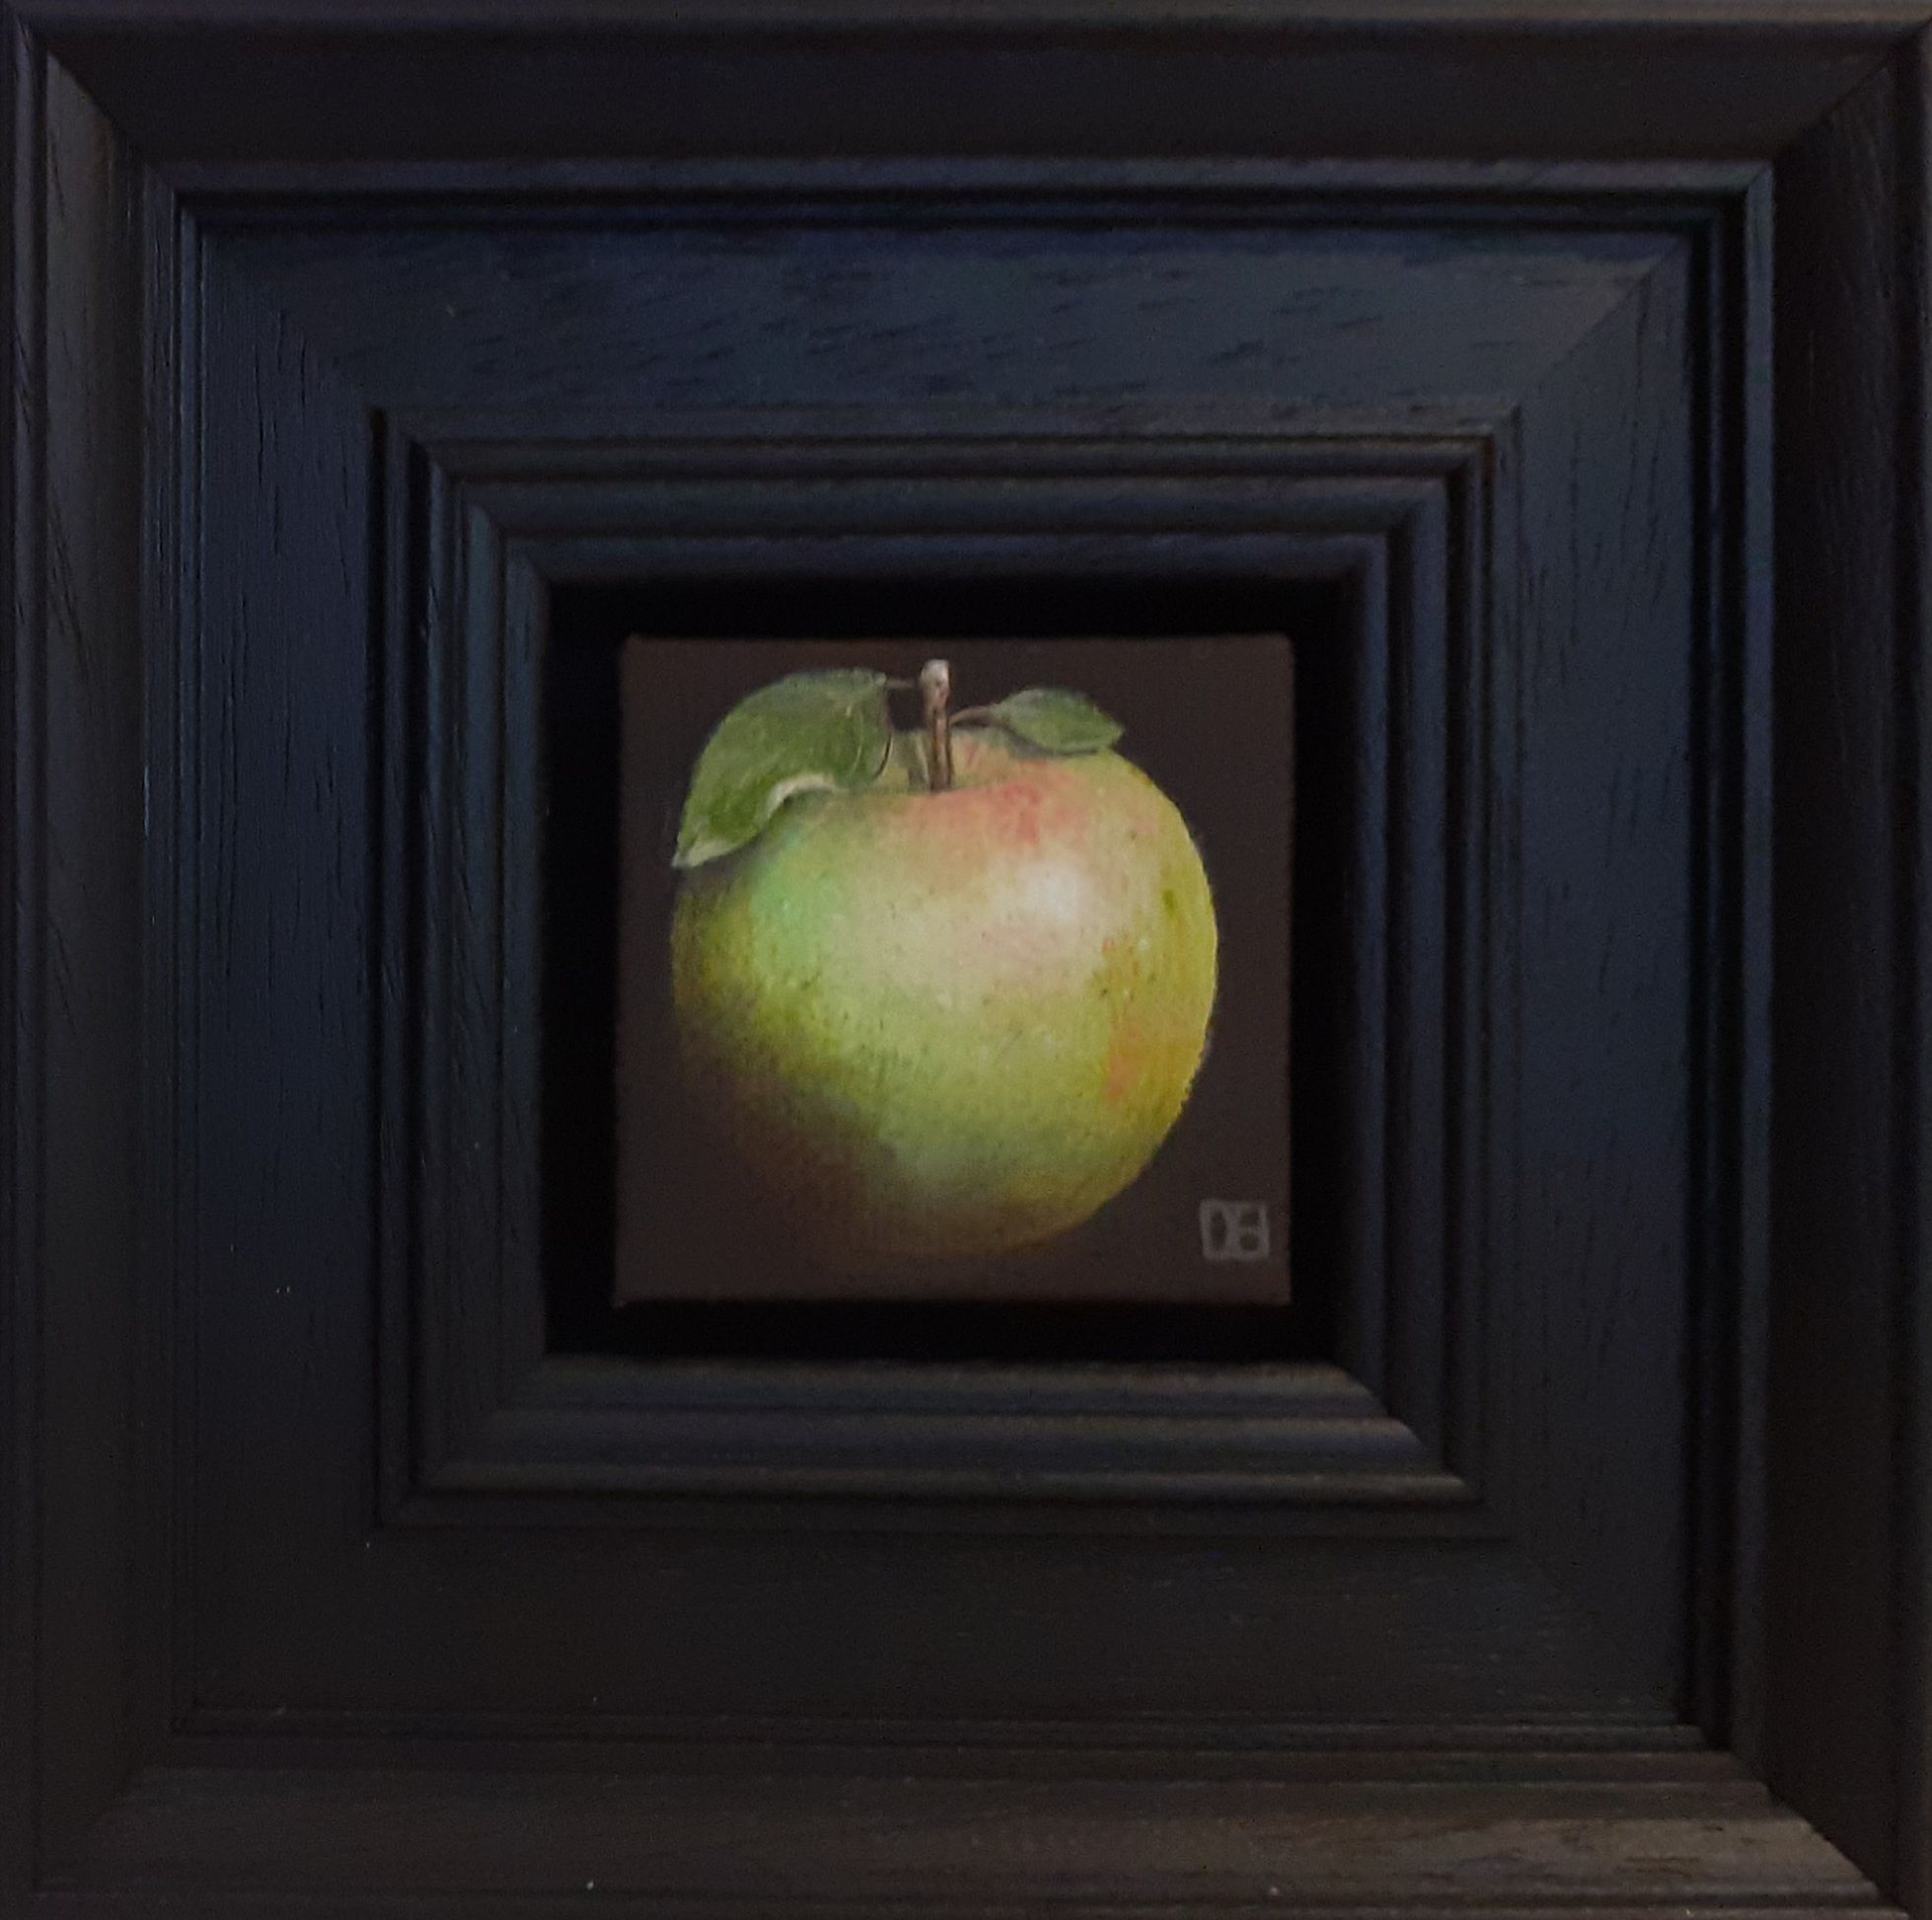 Pocket Green Apple With Red Stripe by Dani Humberstone